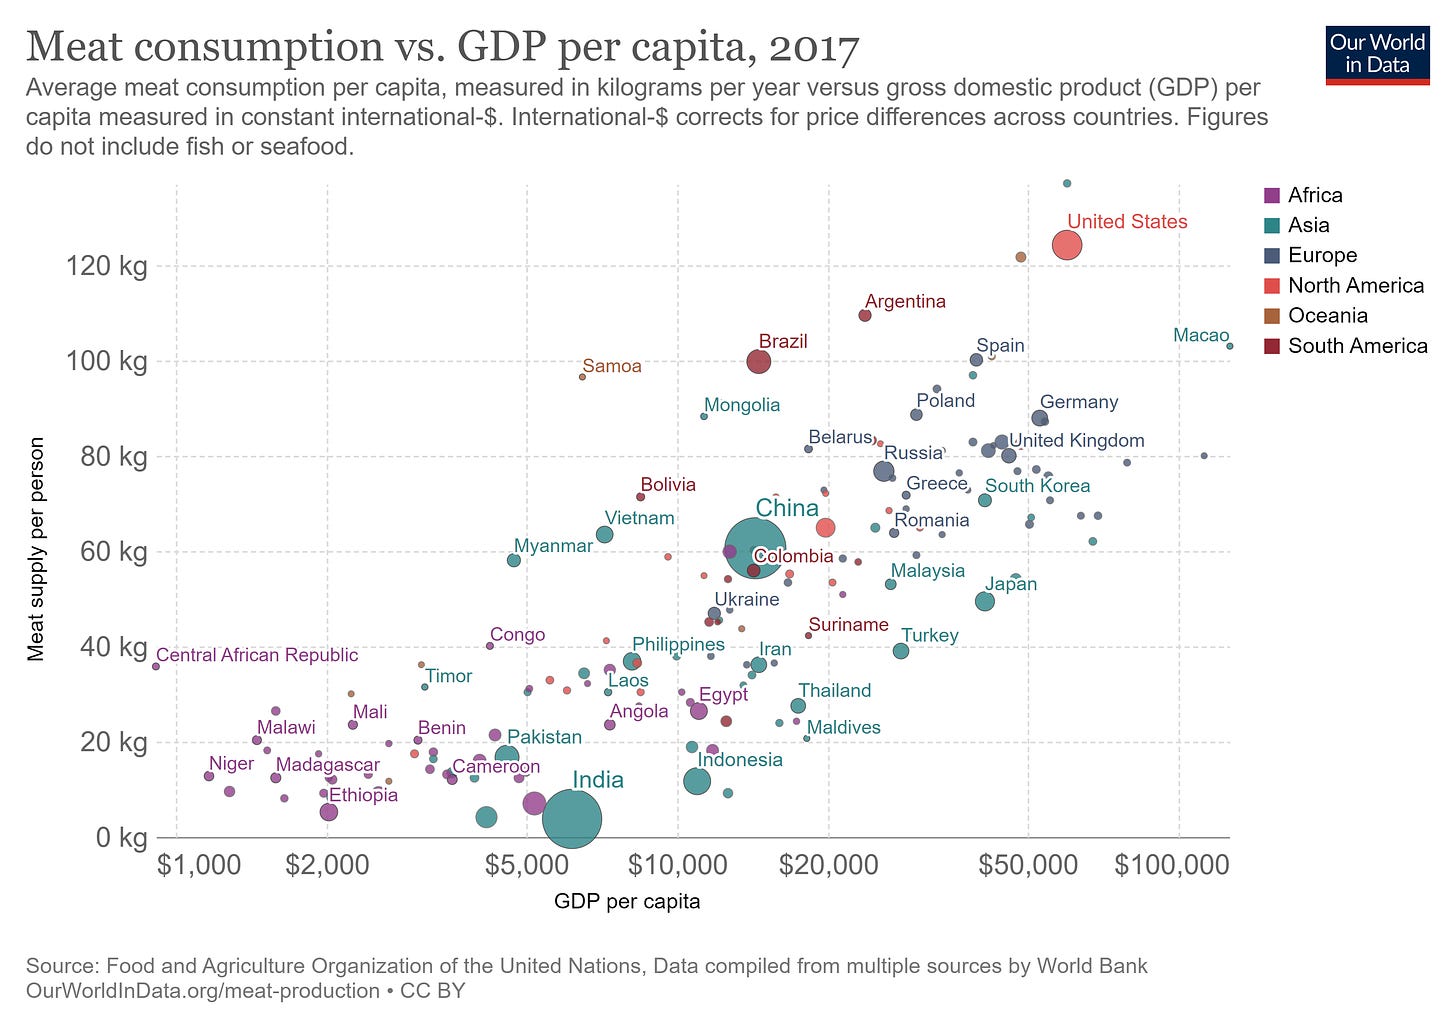 Meat Consumption and GDP